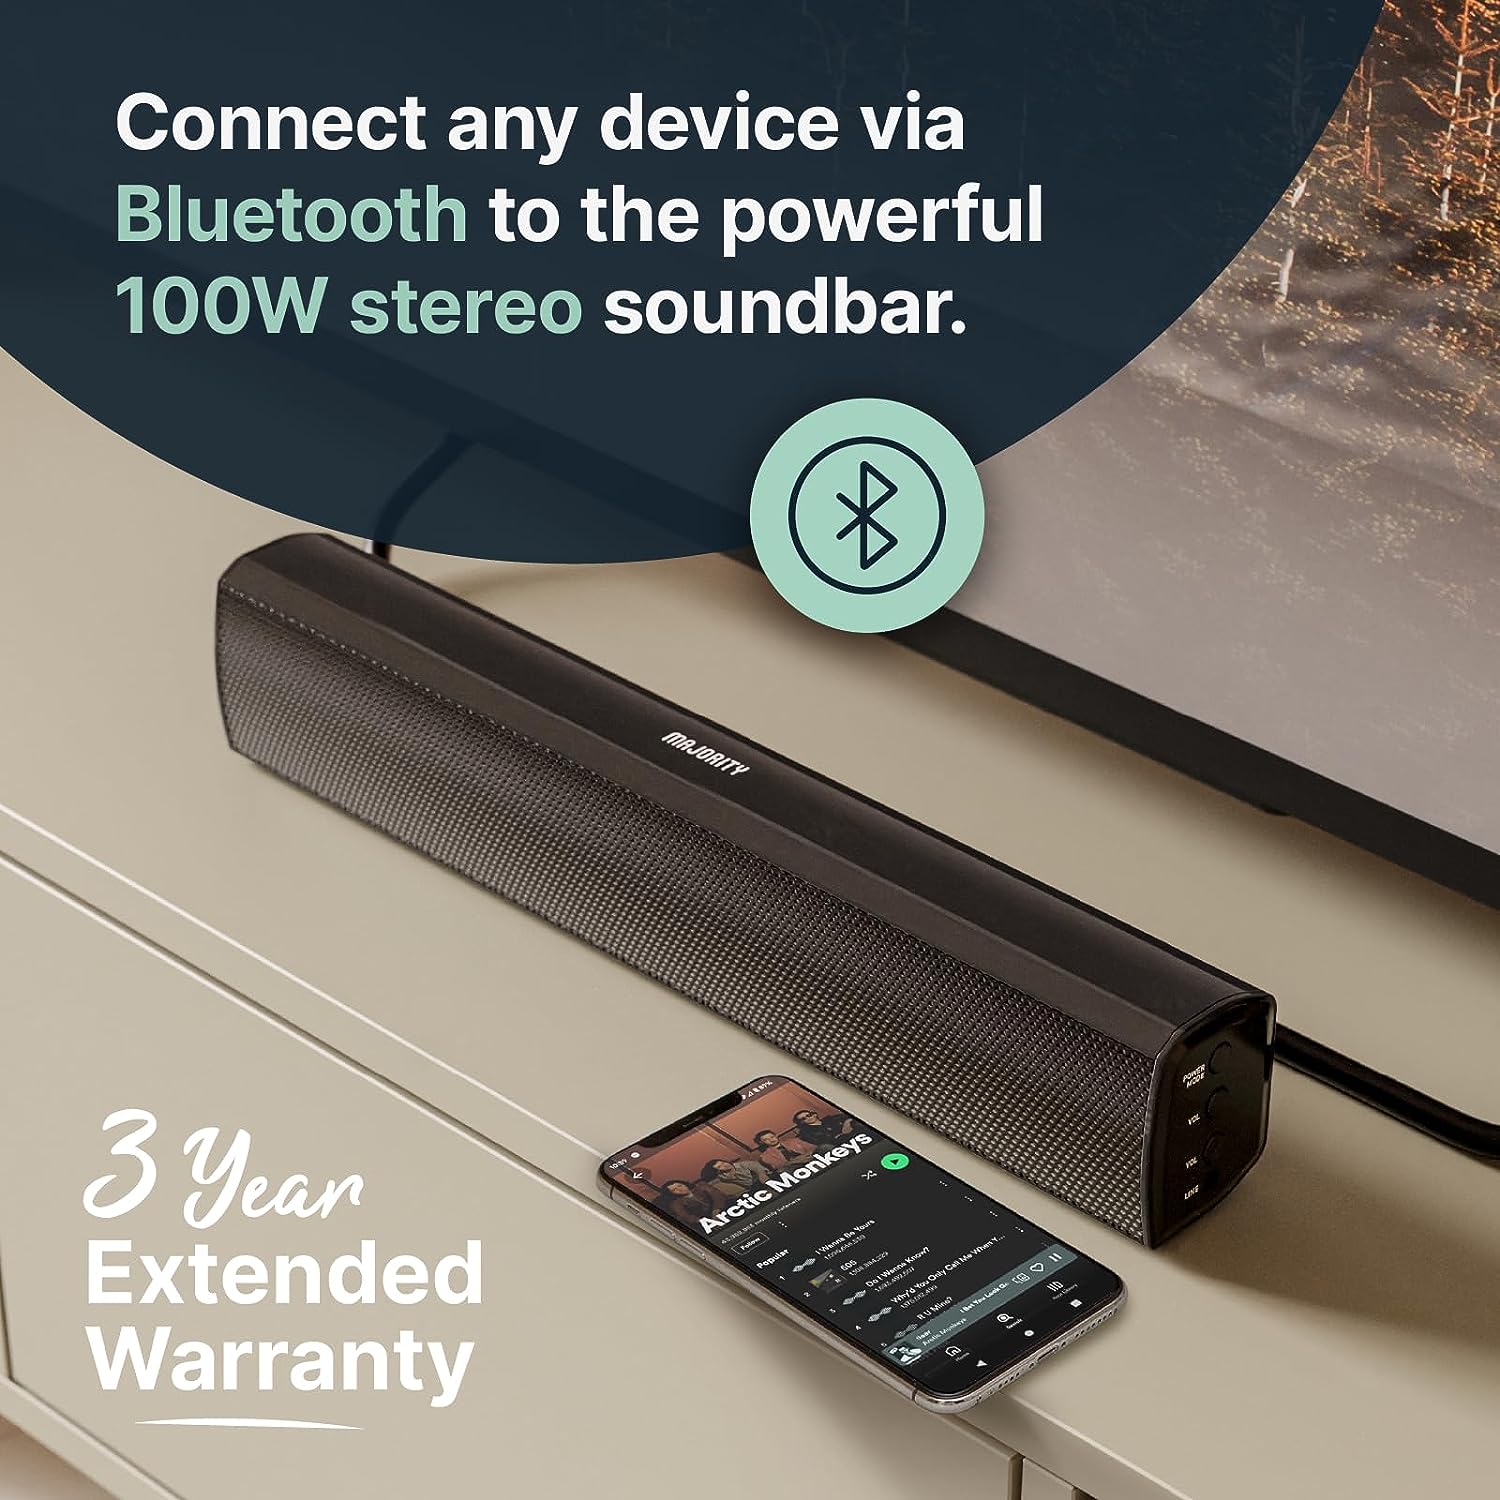 Majority Soundbar with Subwoofer for TV, 15 inch Bluetooth Sound Bar 100 Watts, Home Audio Speaker, Small TV and PC Soundbar | AUX, RCA, Optical, USB | Gaming, Music, Movies Bowfell Plus